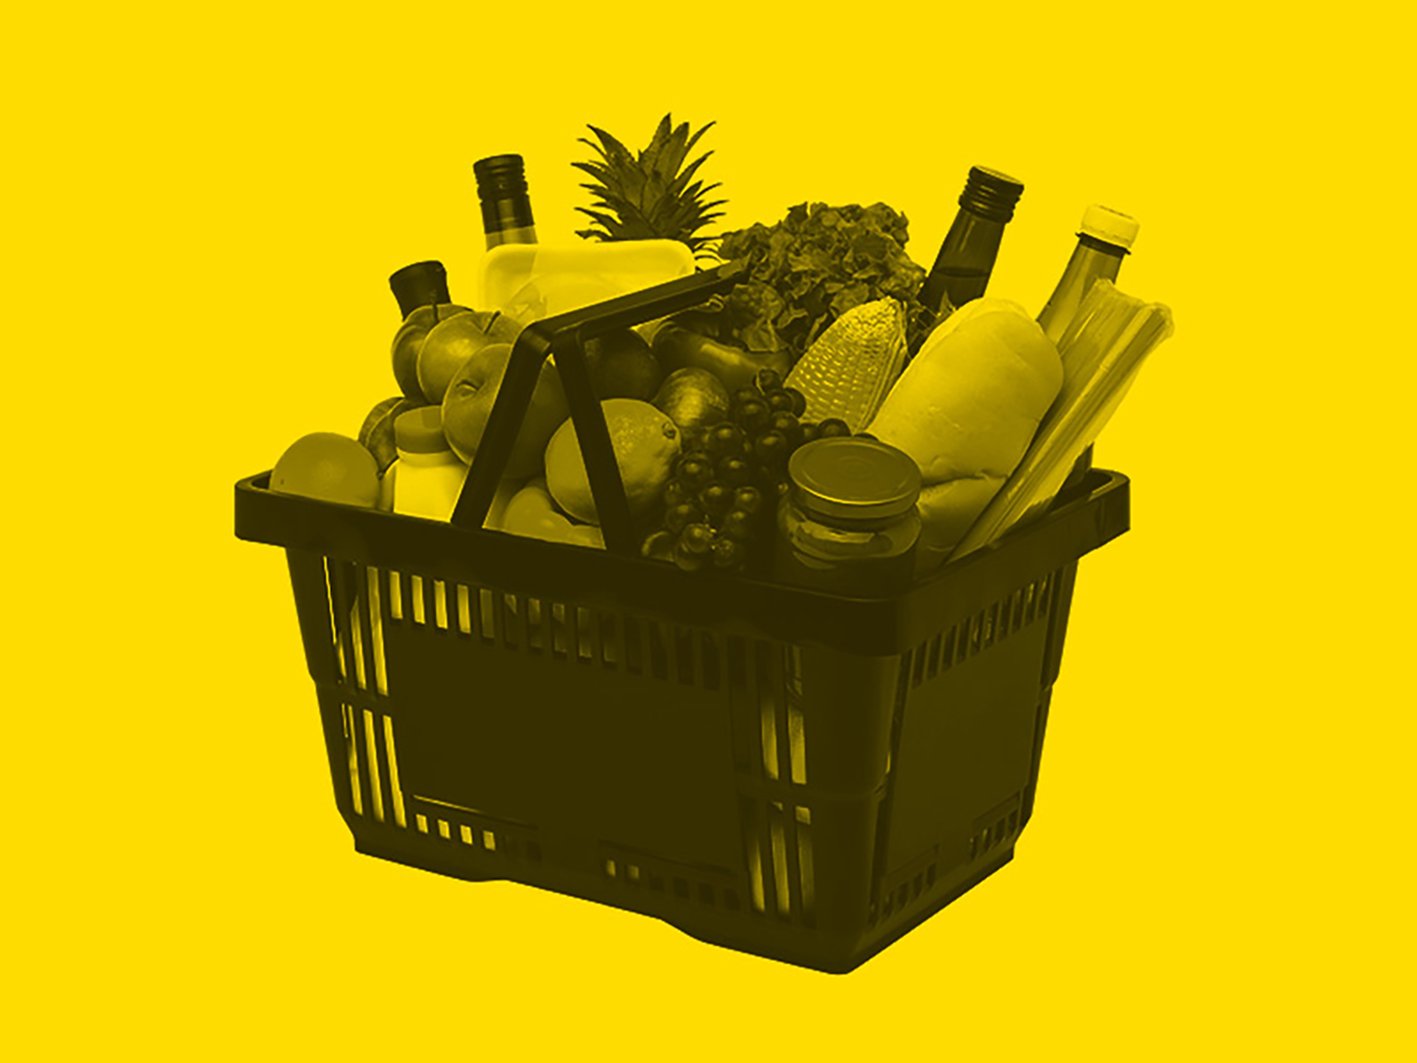 Shopping basket with food